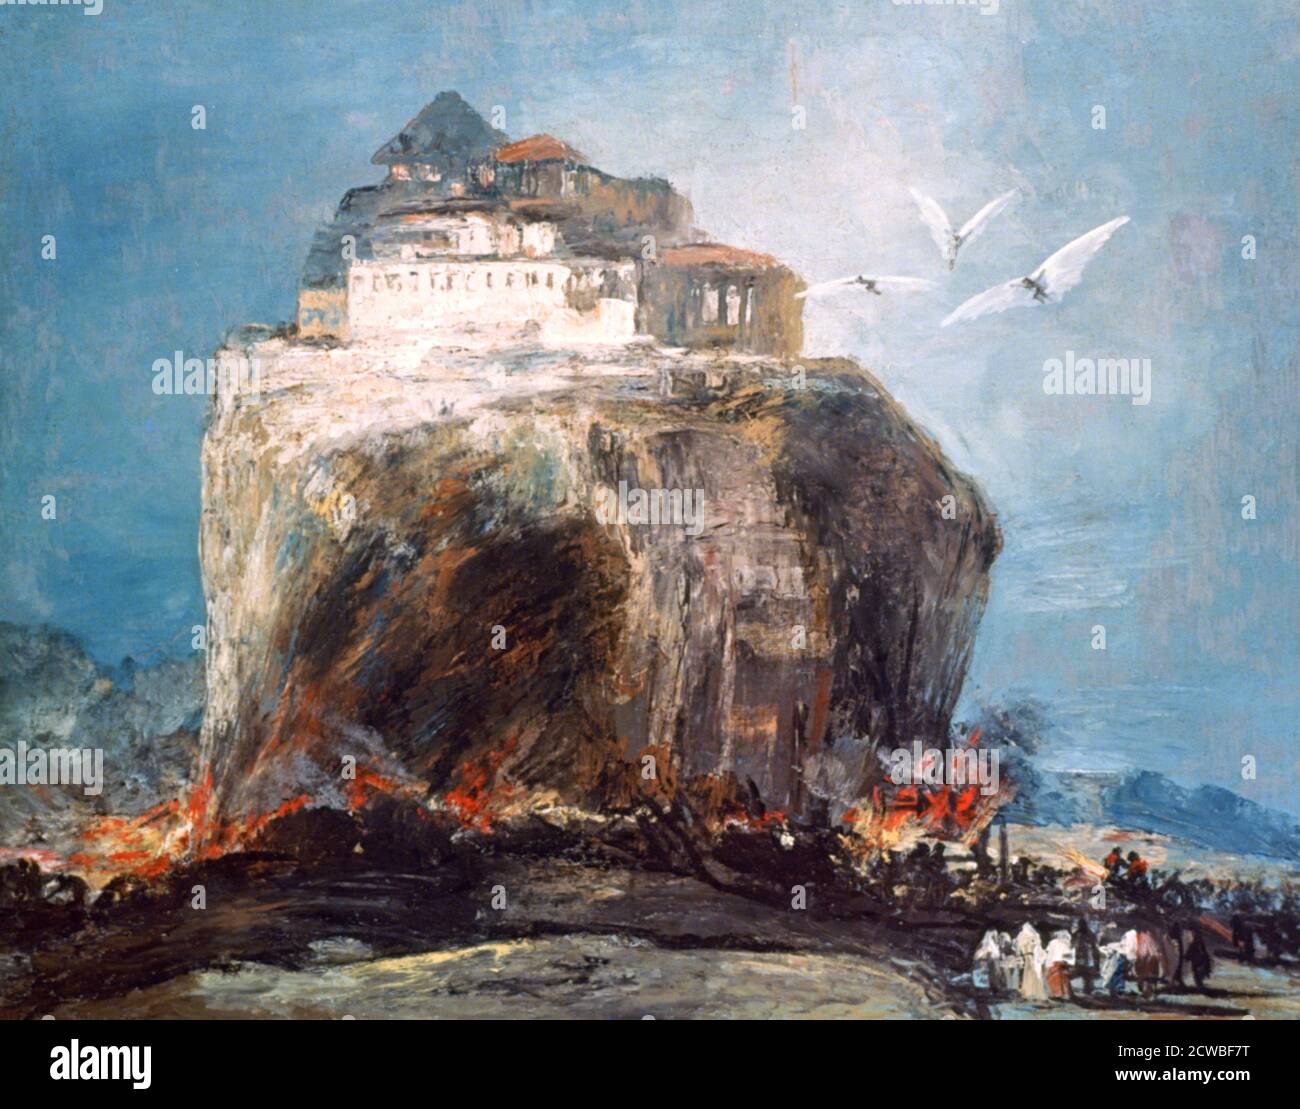 City on the Rock', c1878-1918. Artist: Eugenio Lucas Villamil. Eugenio Lucas Villamil (1858-1918) was a Spanish costumbrista painter. Many of his works were painted similarly and are often confused with Francisco de Goya's work. Stock Photo